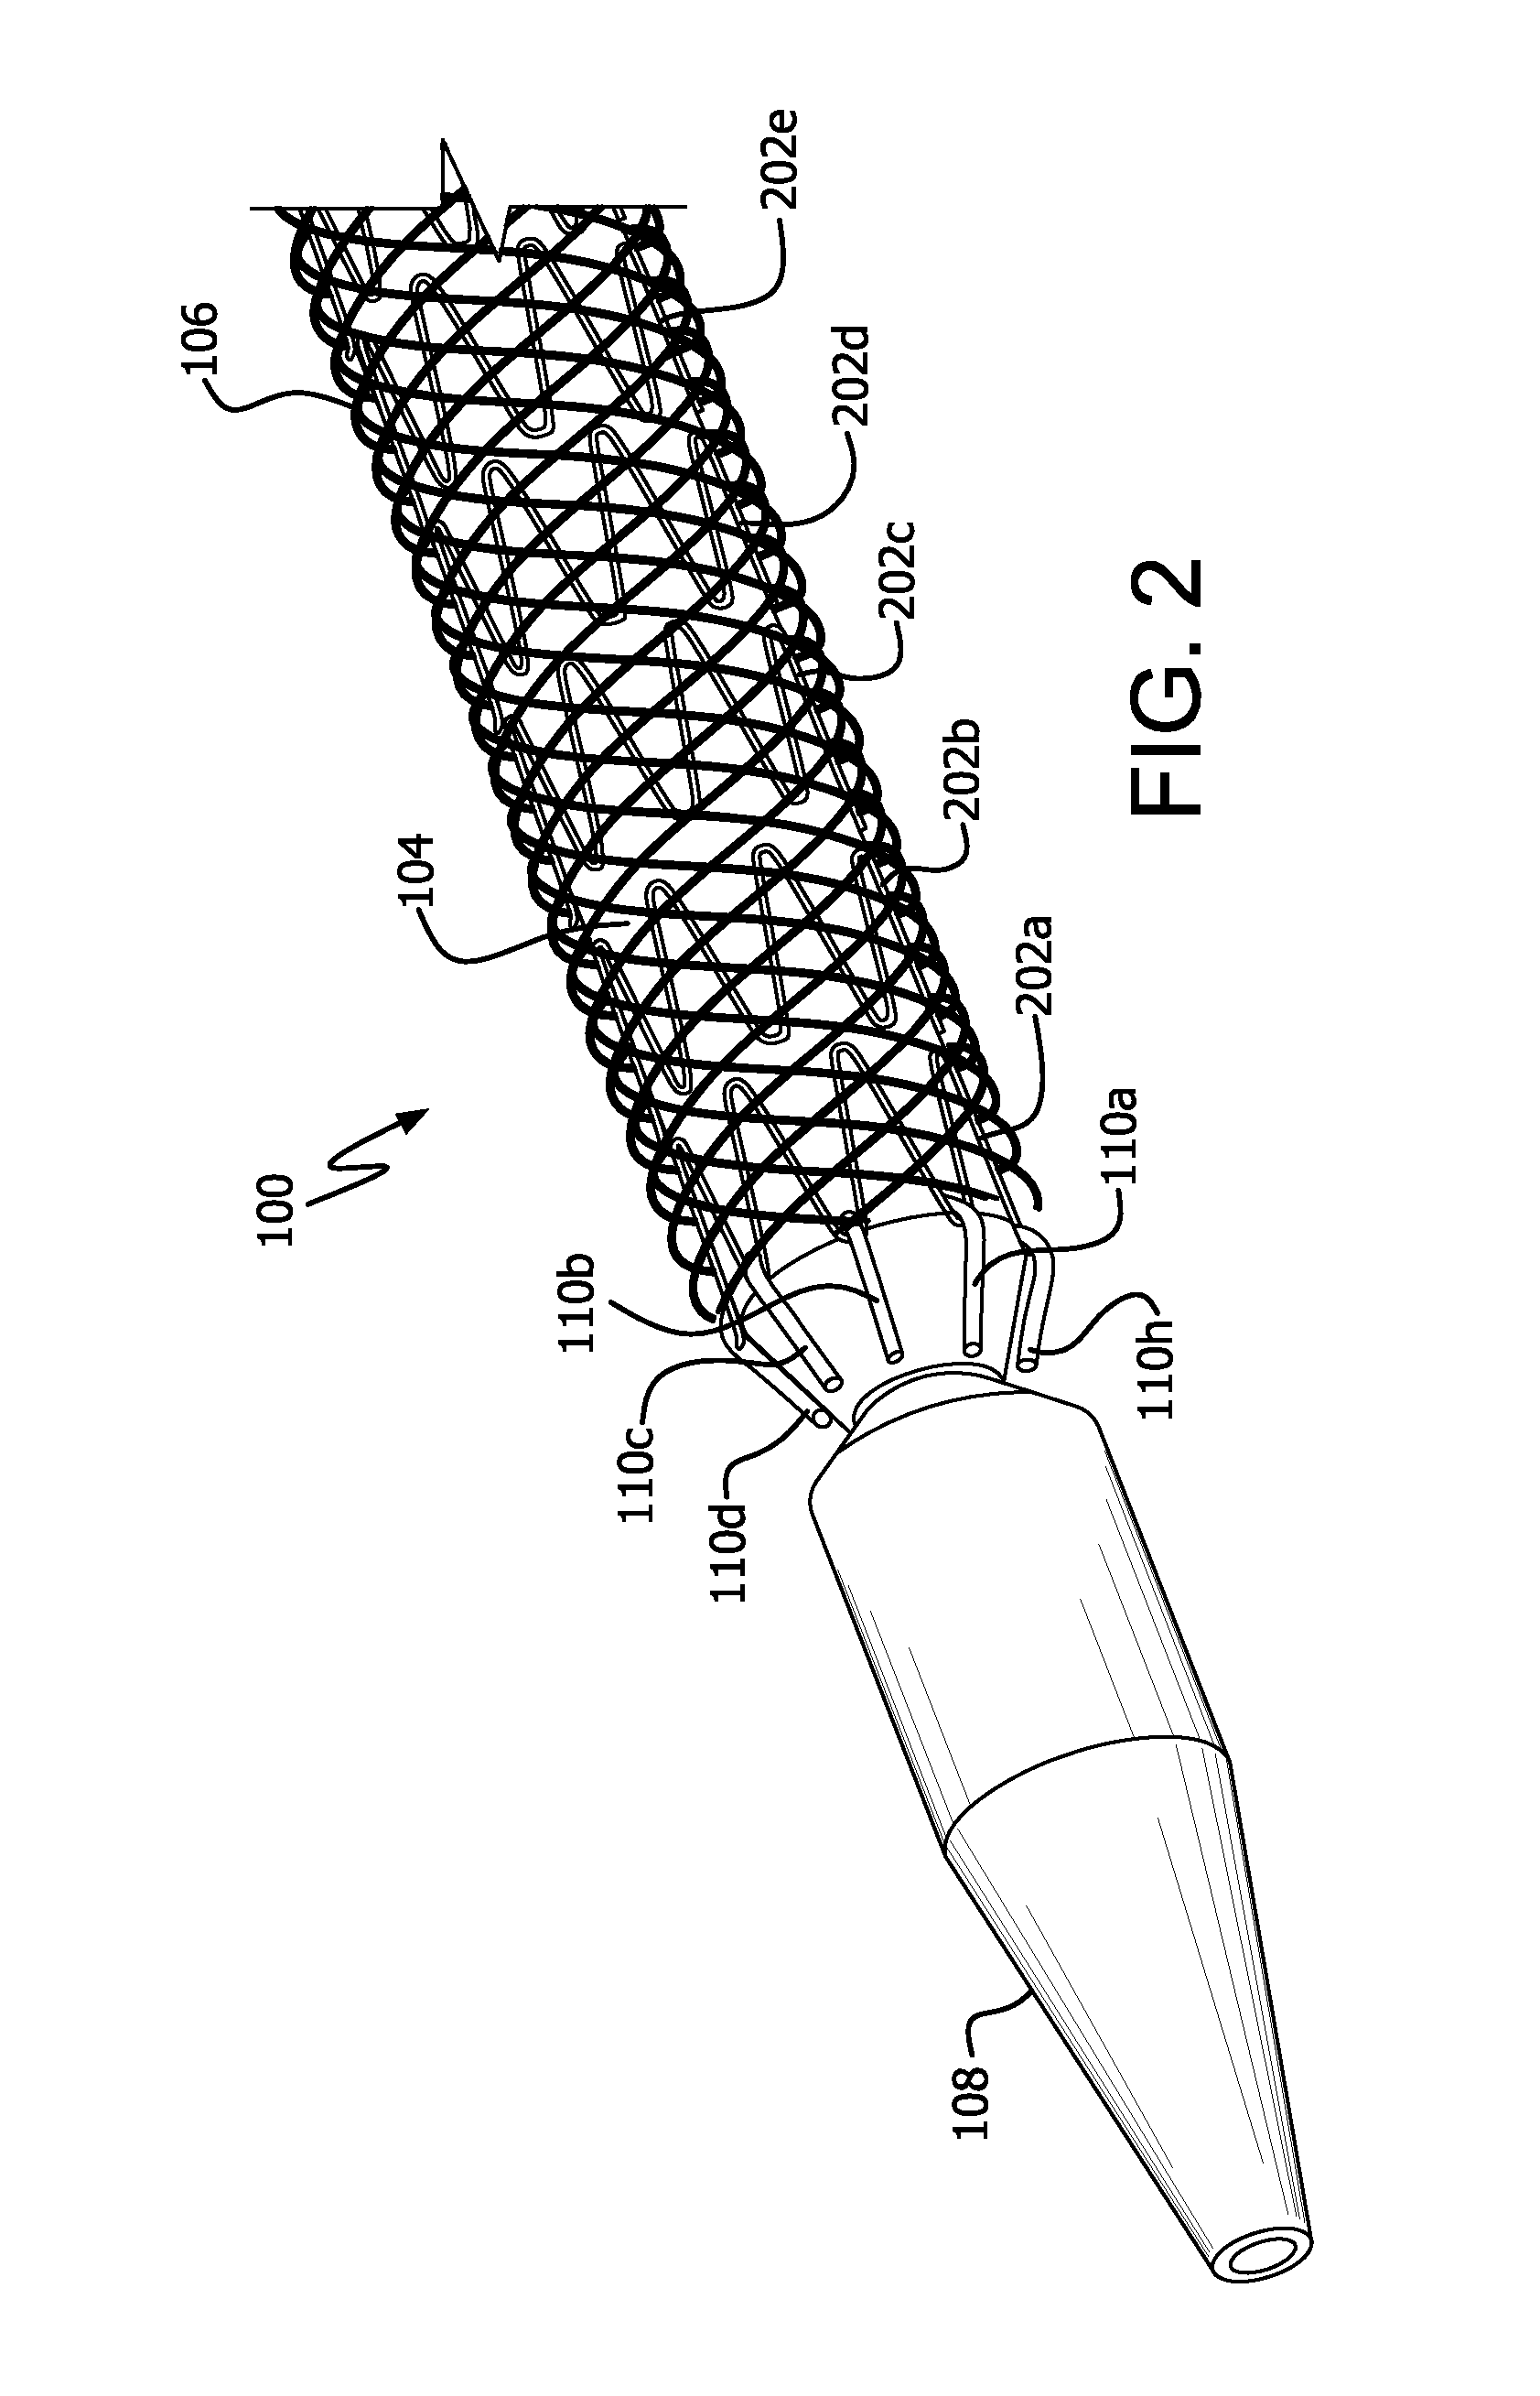 Endoprosthesis delivery systems with deployment aids